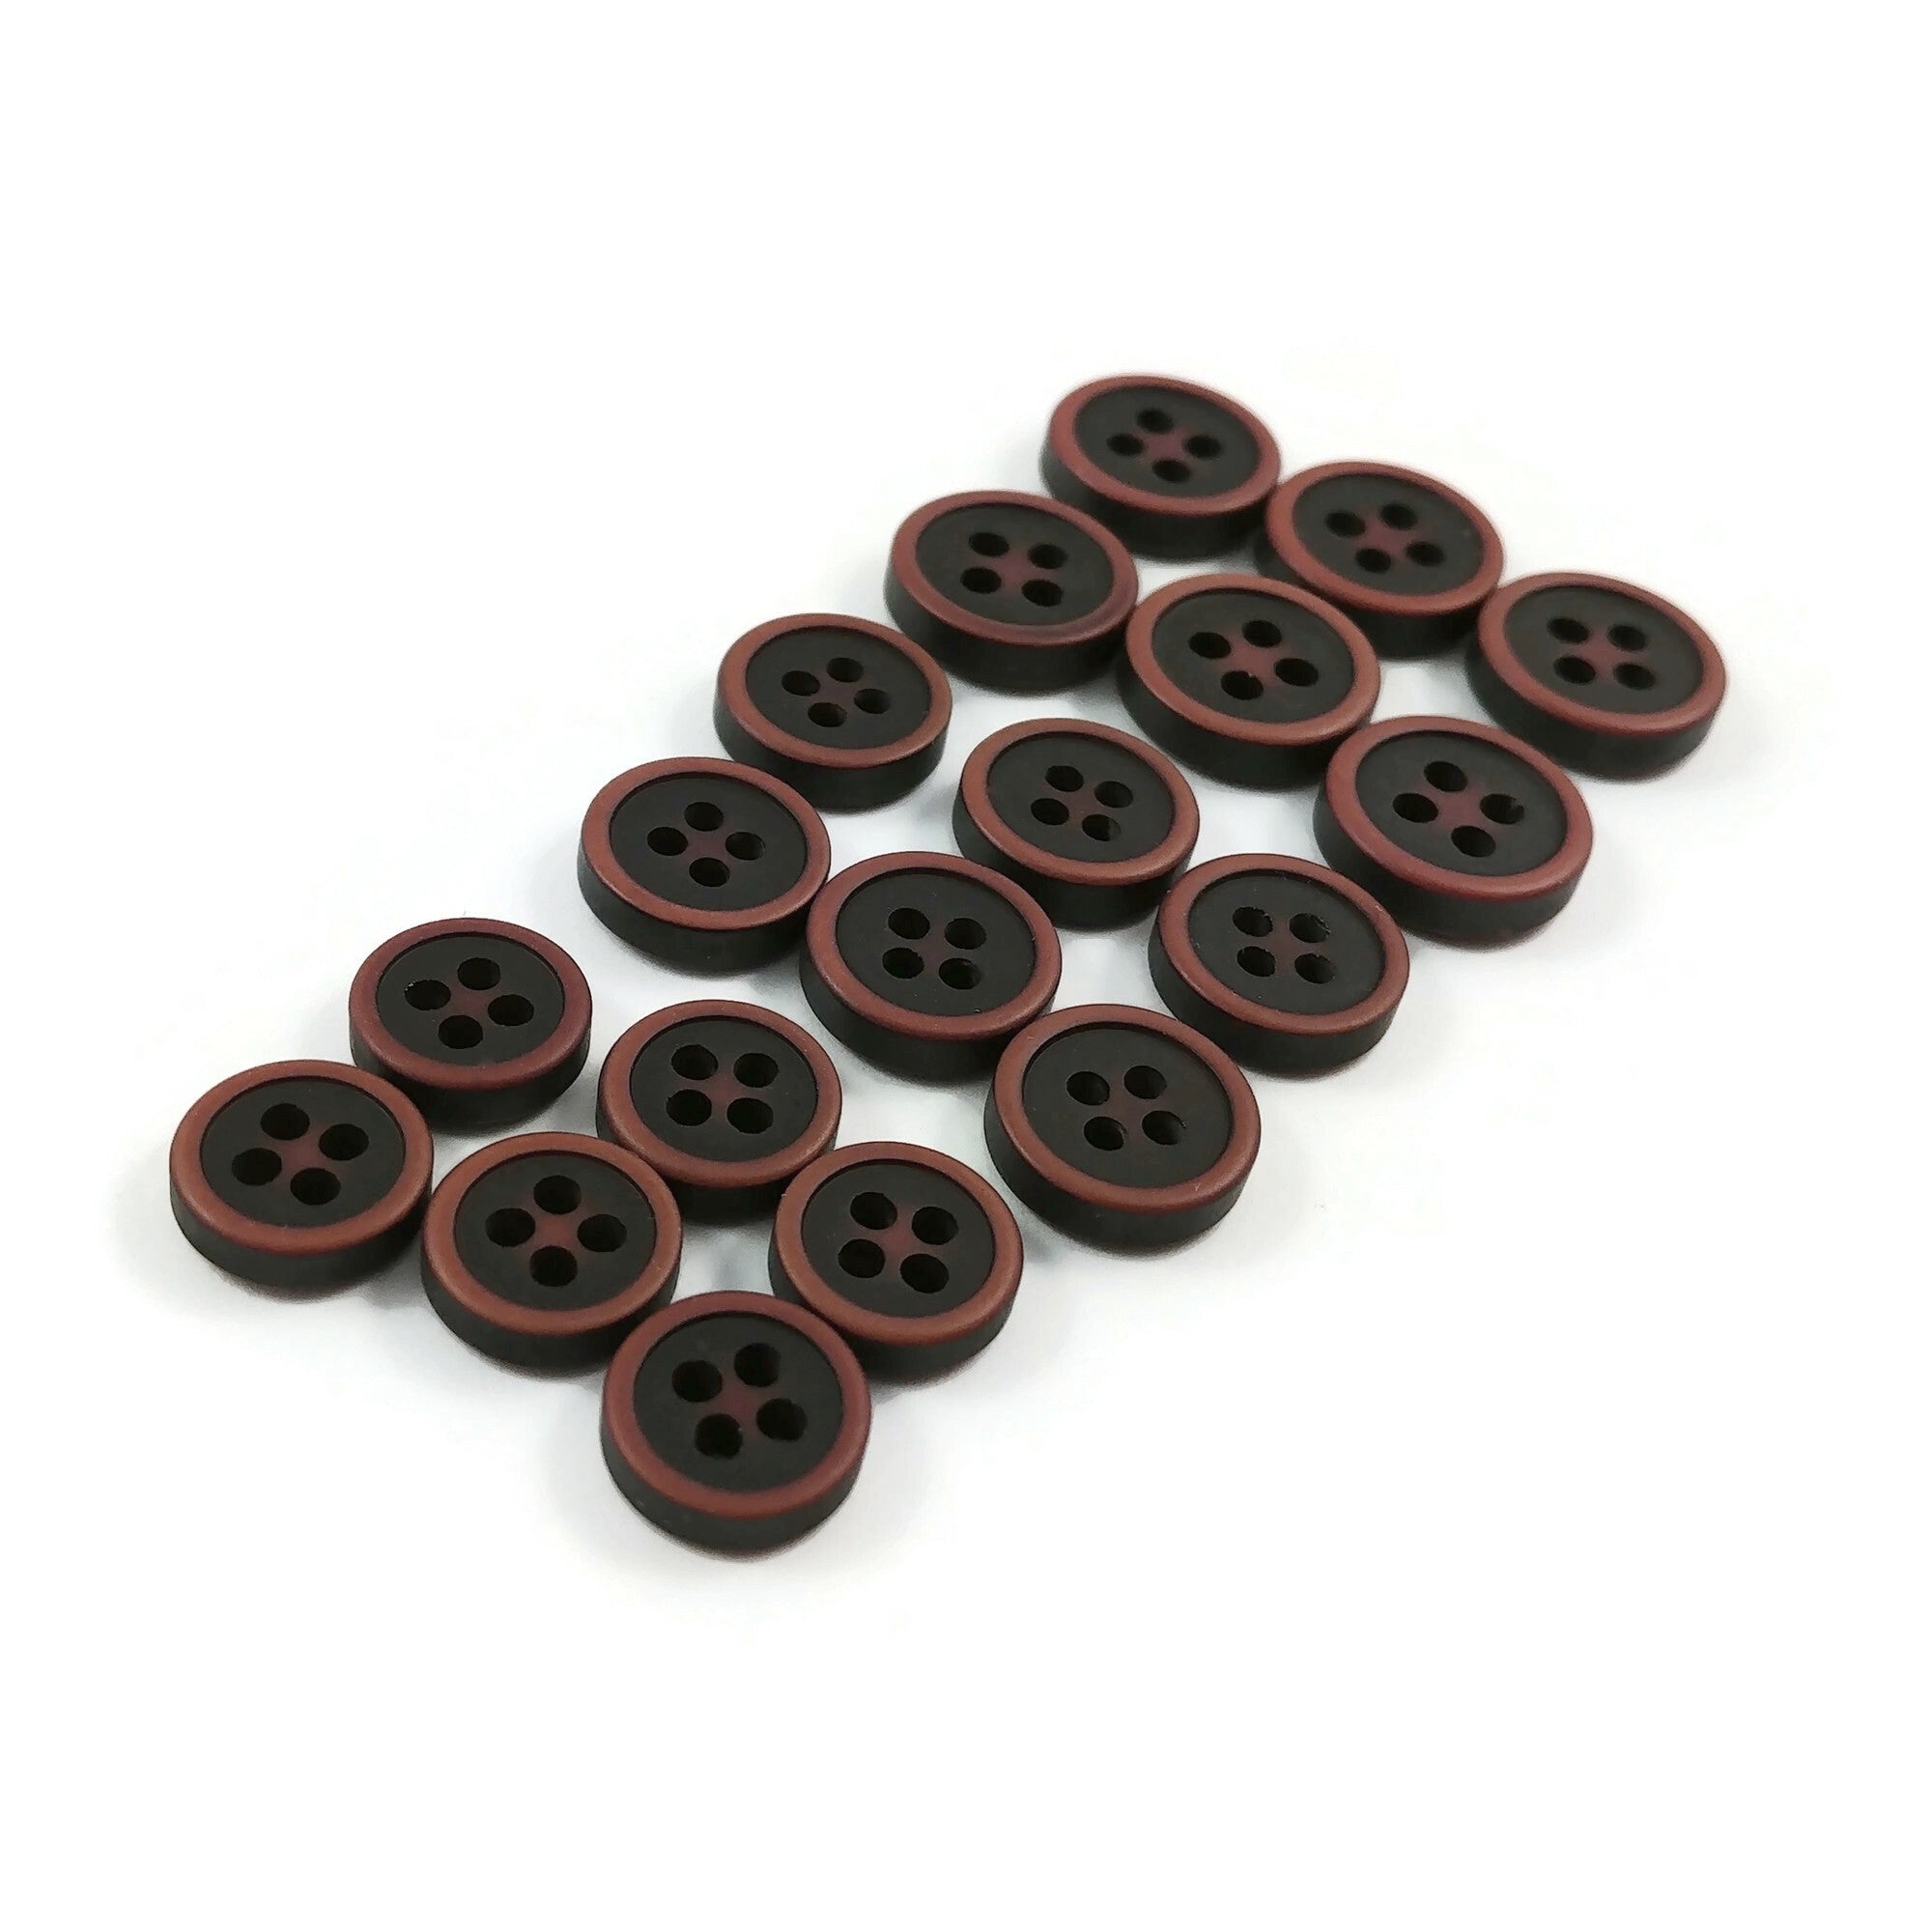 10-50PCs Large Round Resin Sewing Buttons Scrapbooking Solid Color